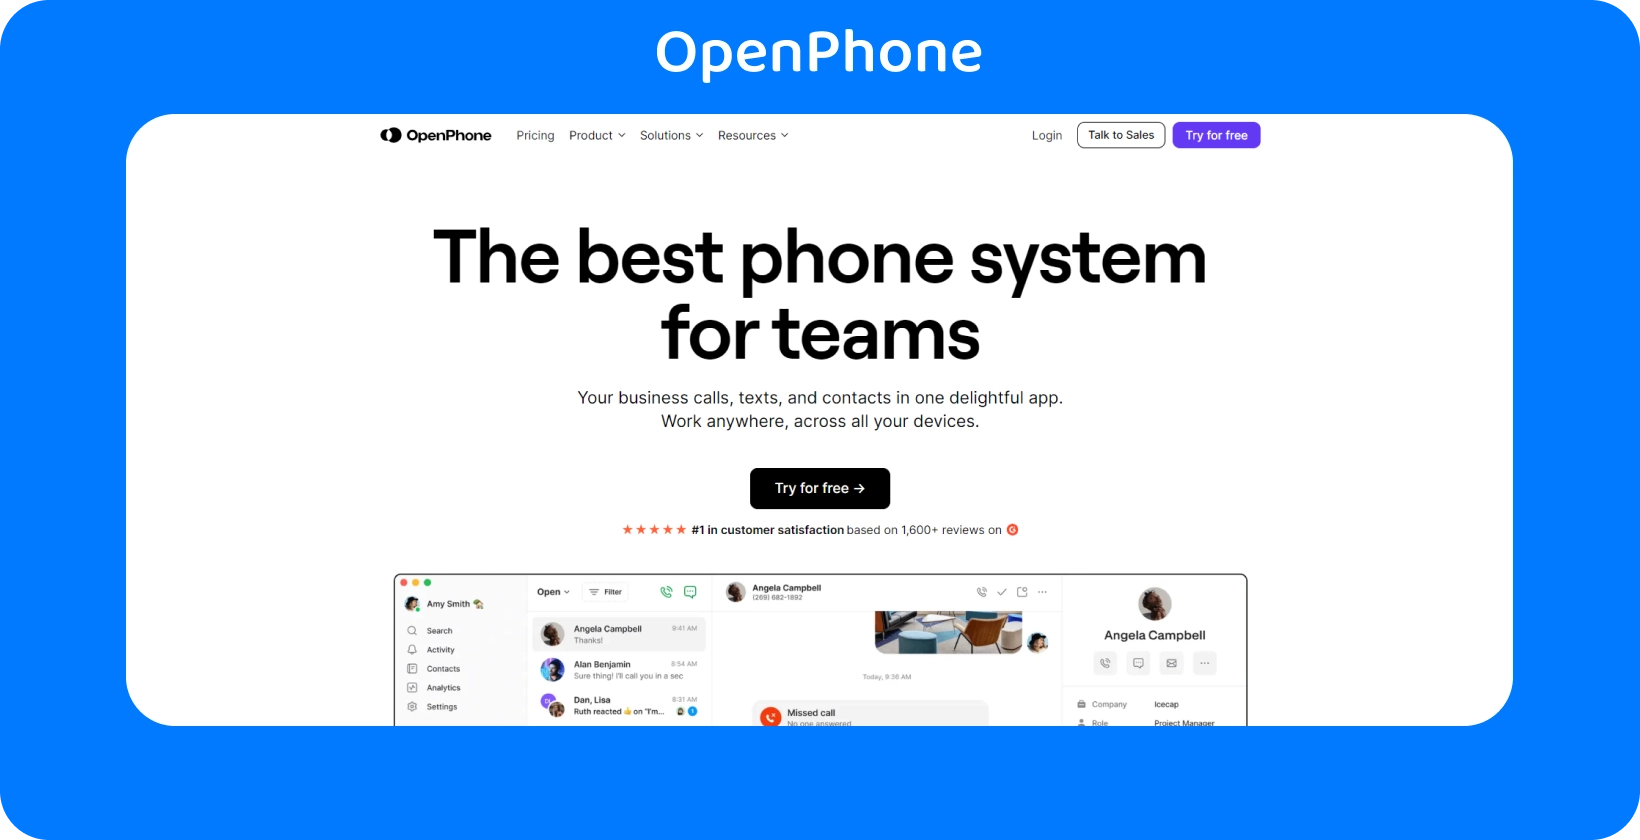 OpenPhone provides the phone system for teams, integrating calls, texts, and contacts for business efficiency.